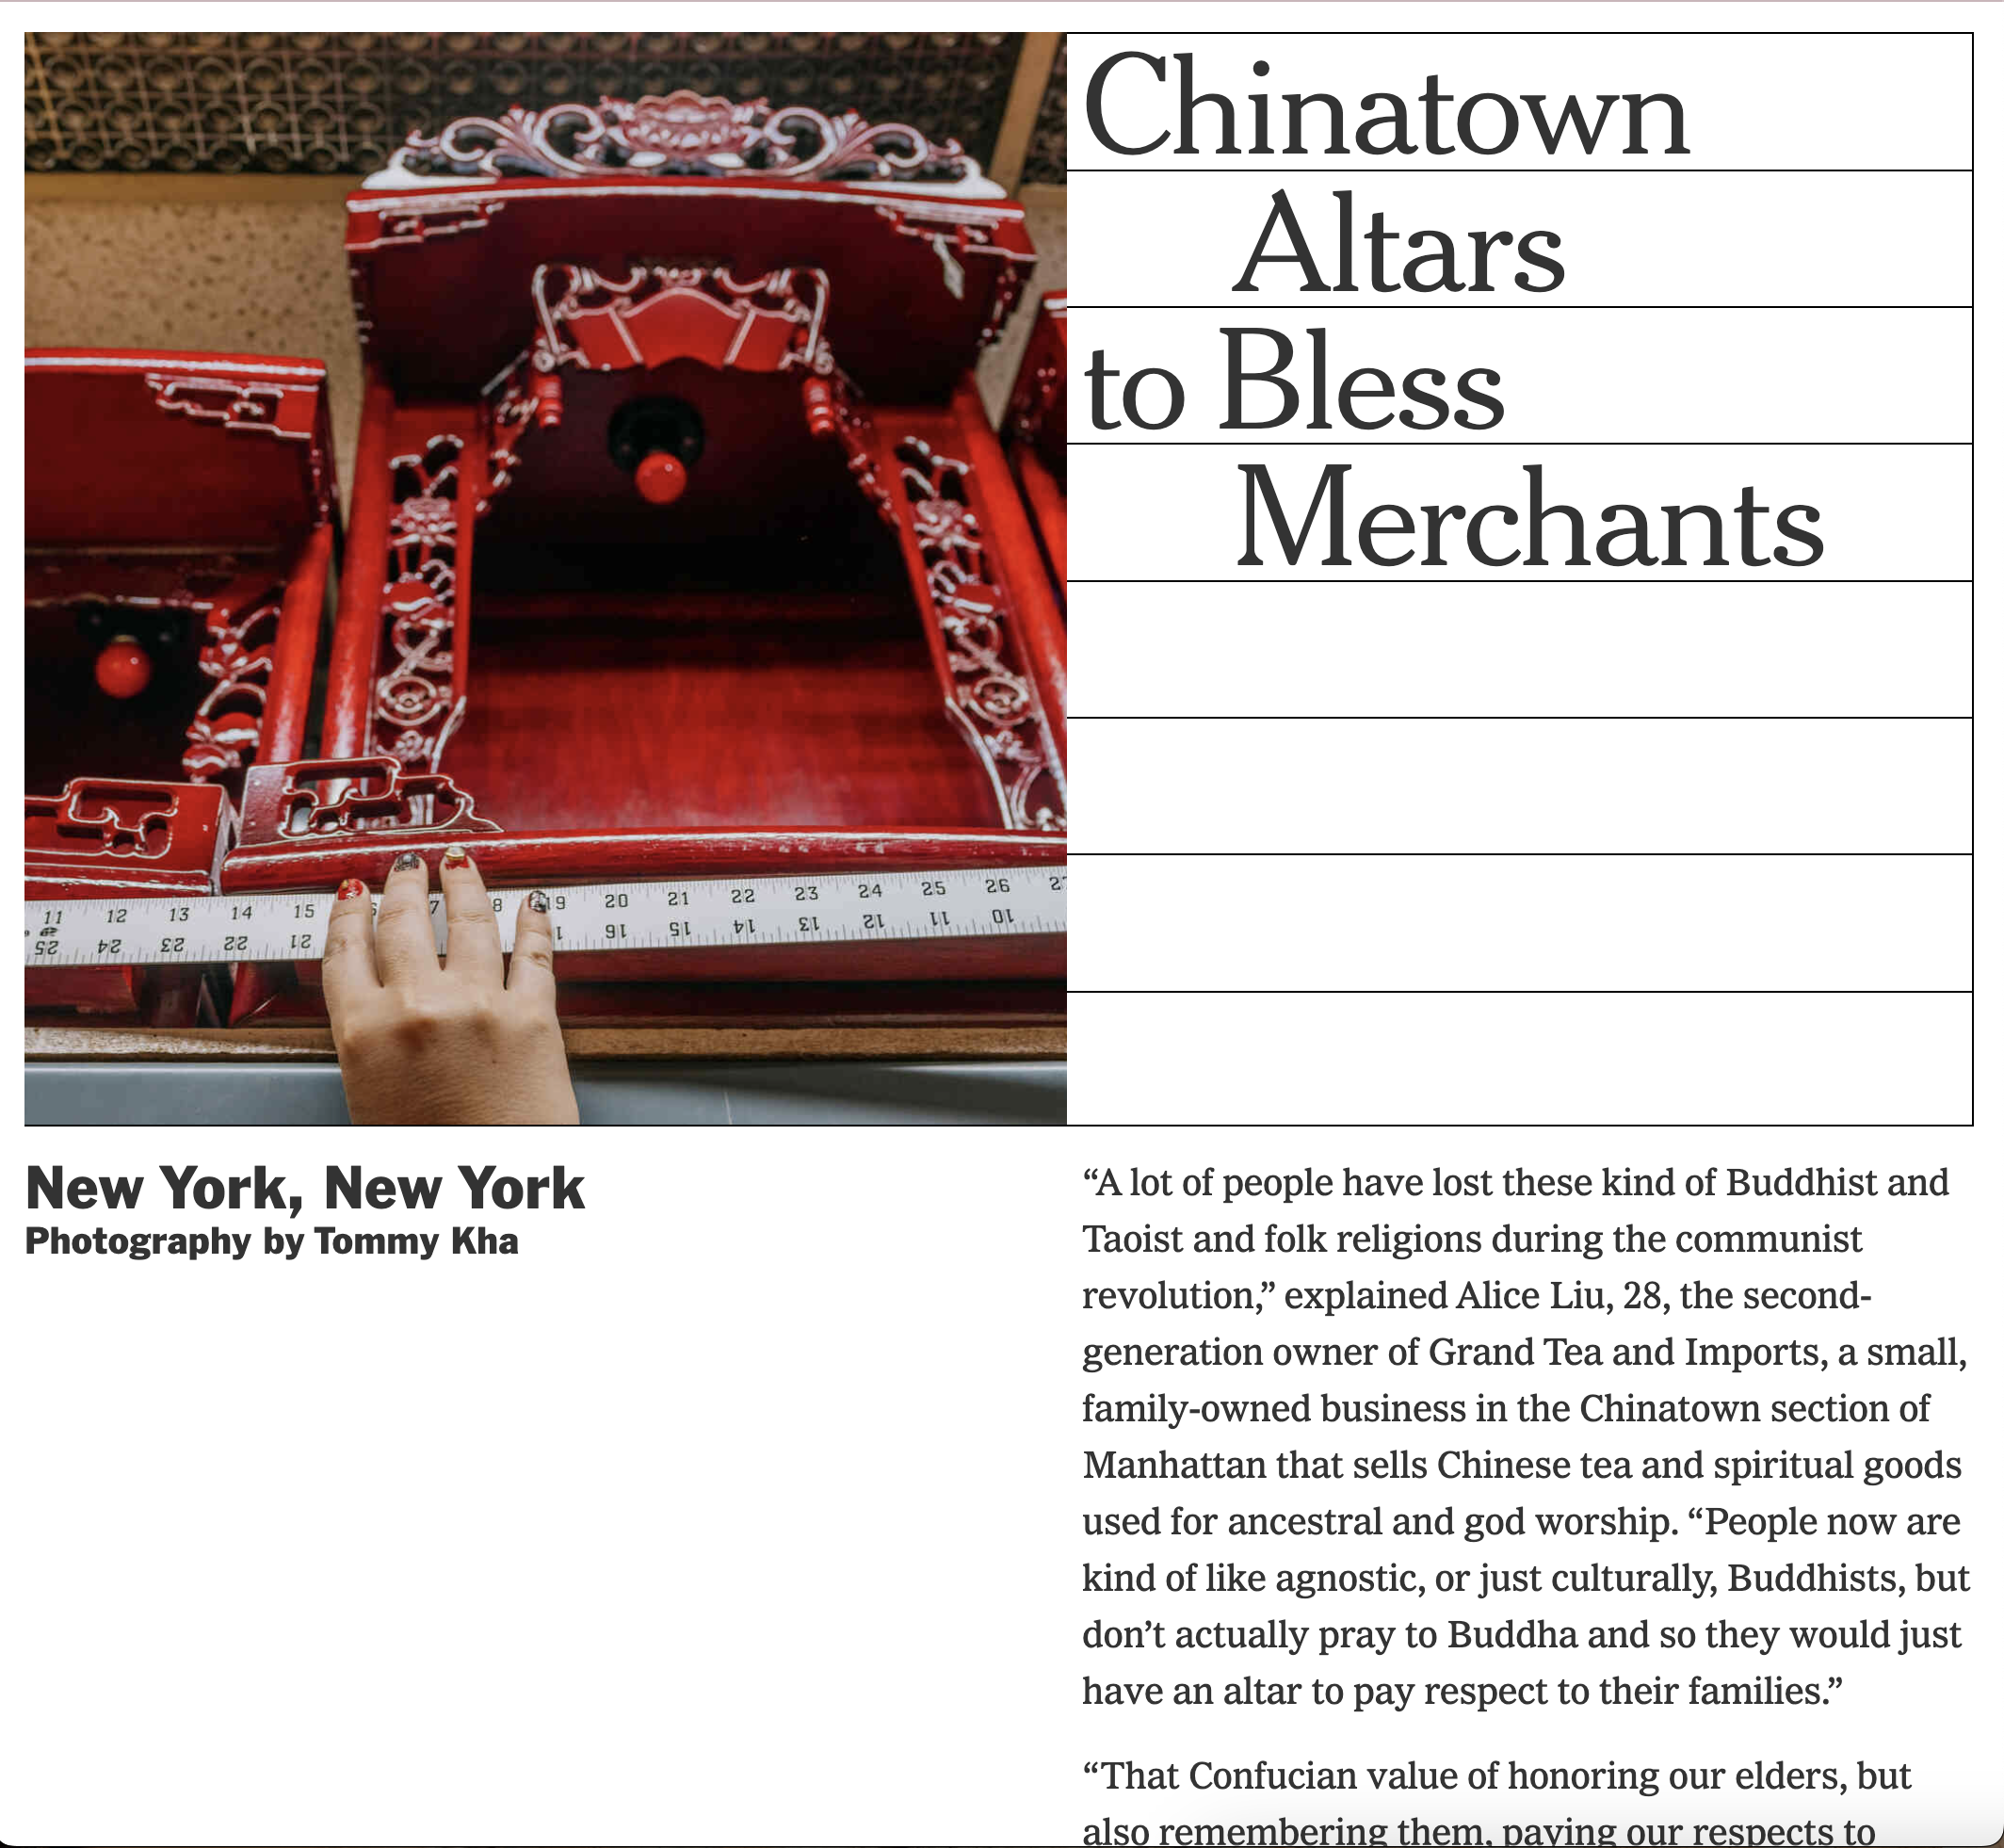 Chinatown Altars to Bless Merchants